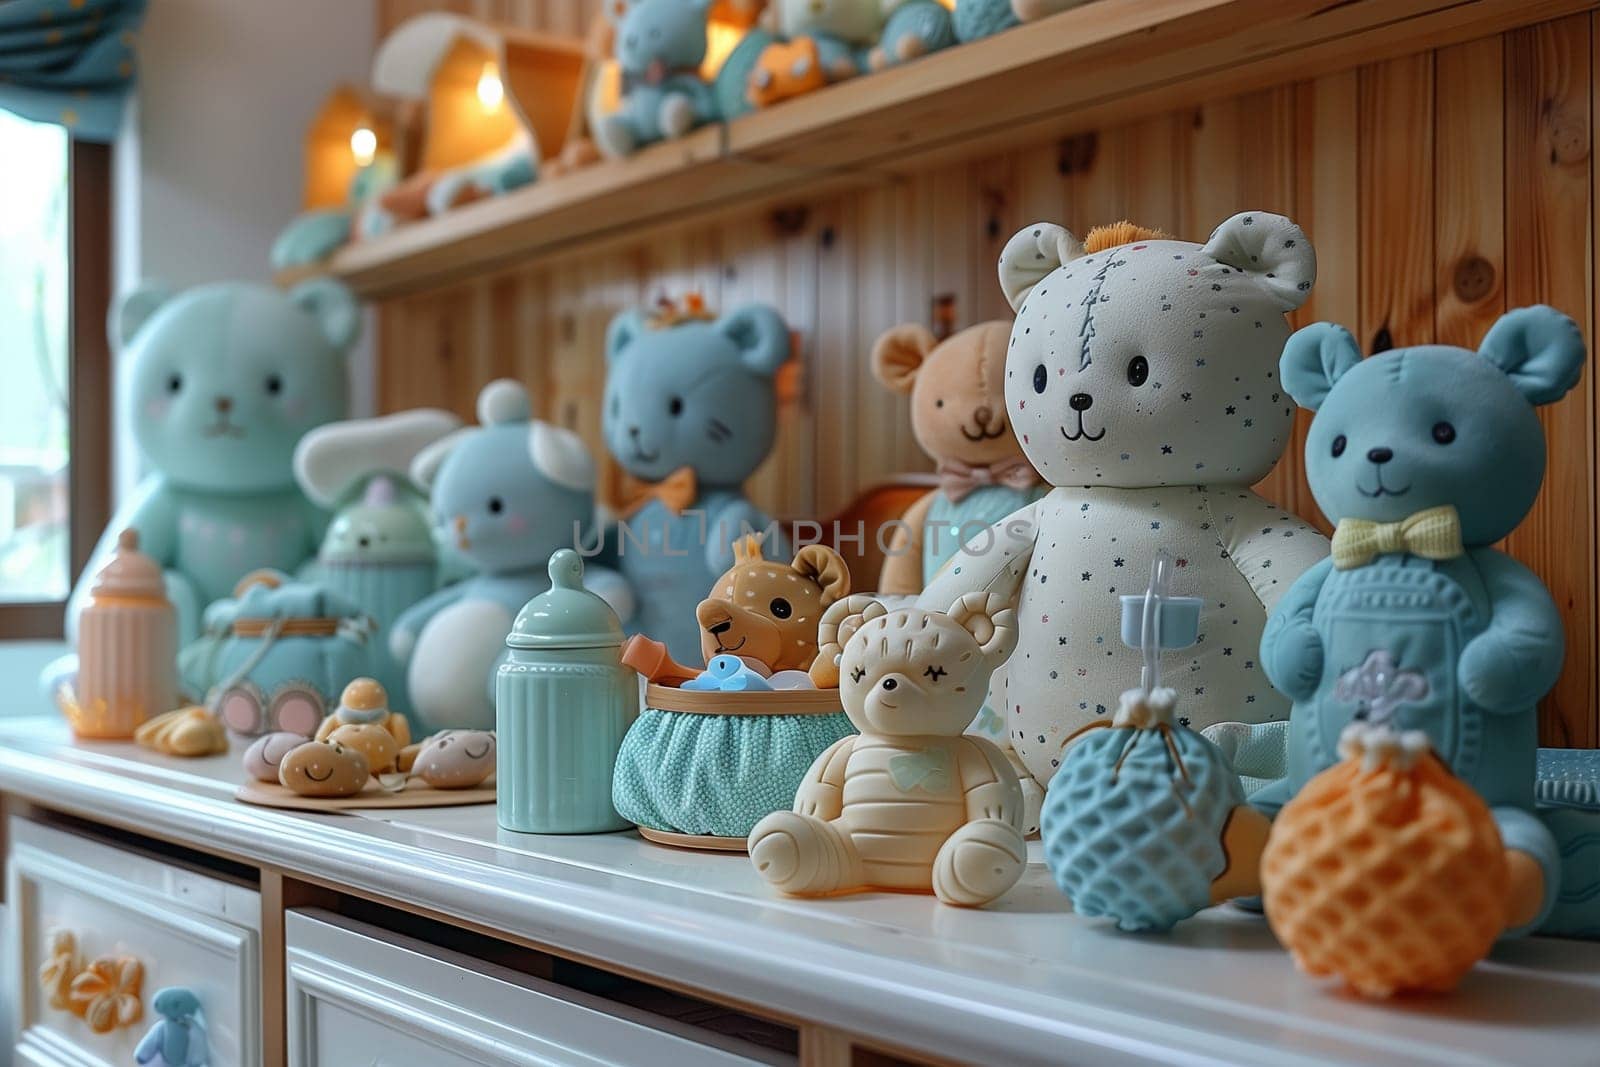 Several teddy bears sitting neatly in rows on top of a wooden dresser in a room.